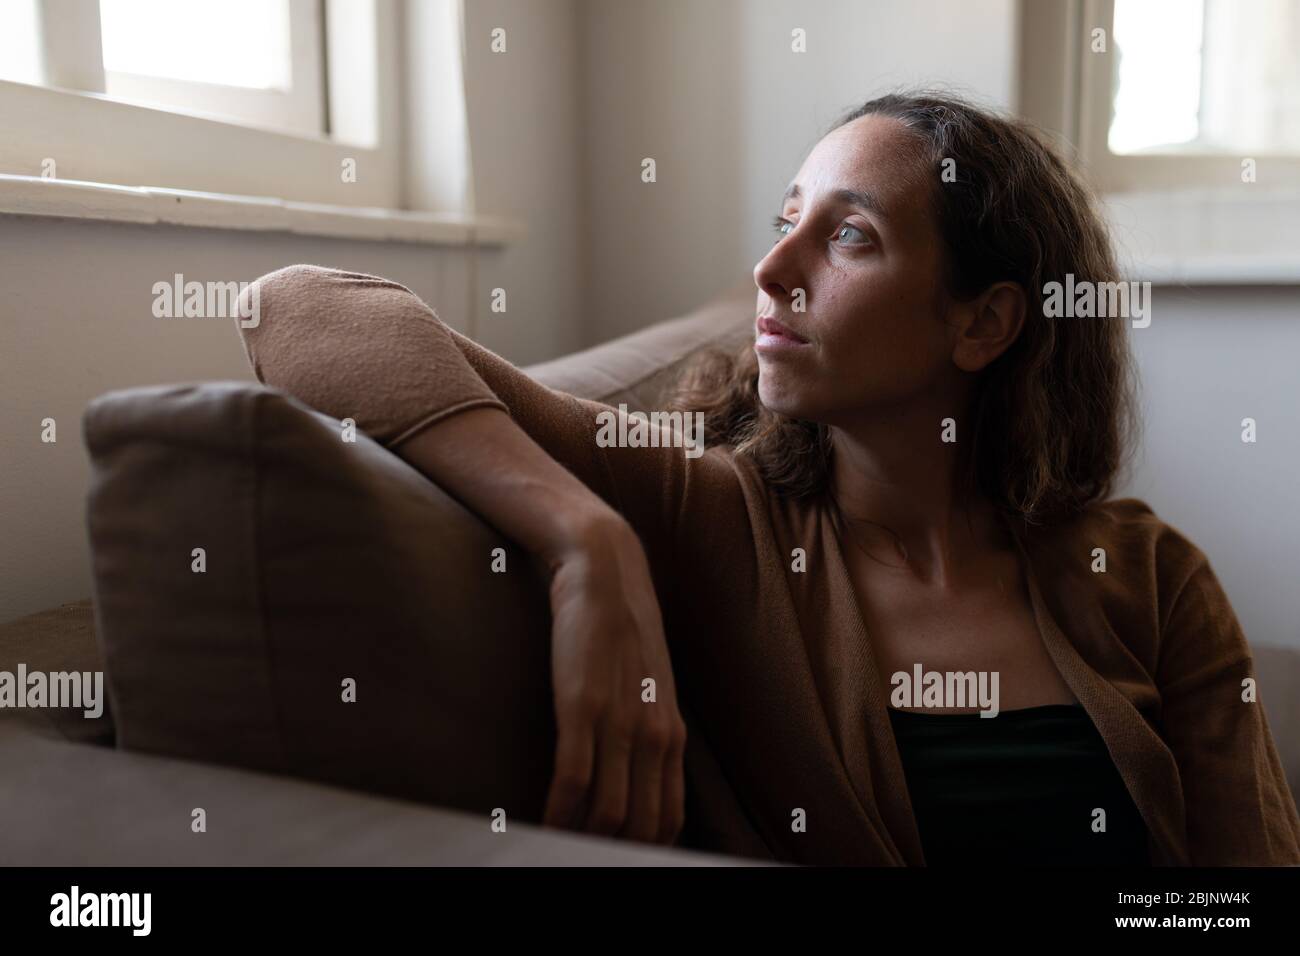 Caucasian woman spending time at home self isolating and social distancing in quarantine lockdown du Stock Photo